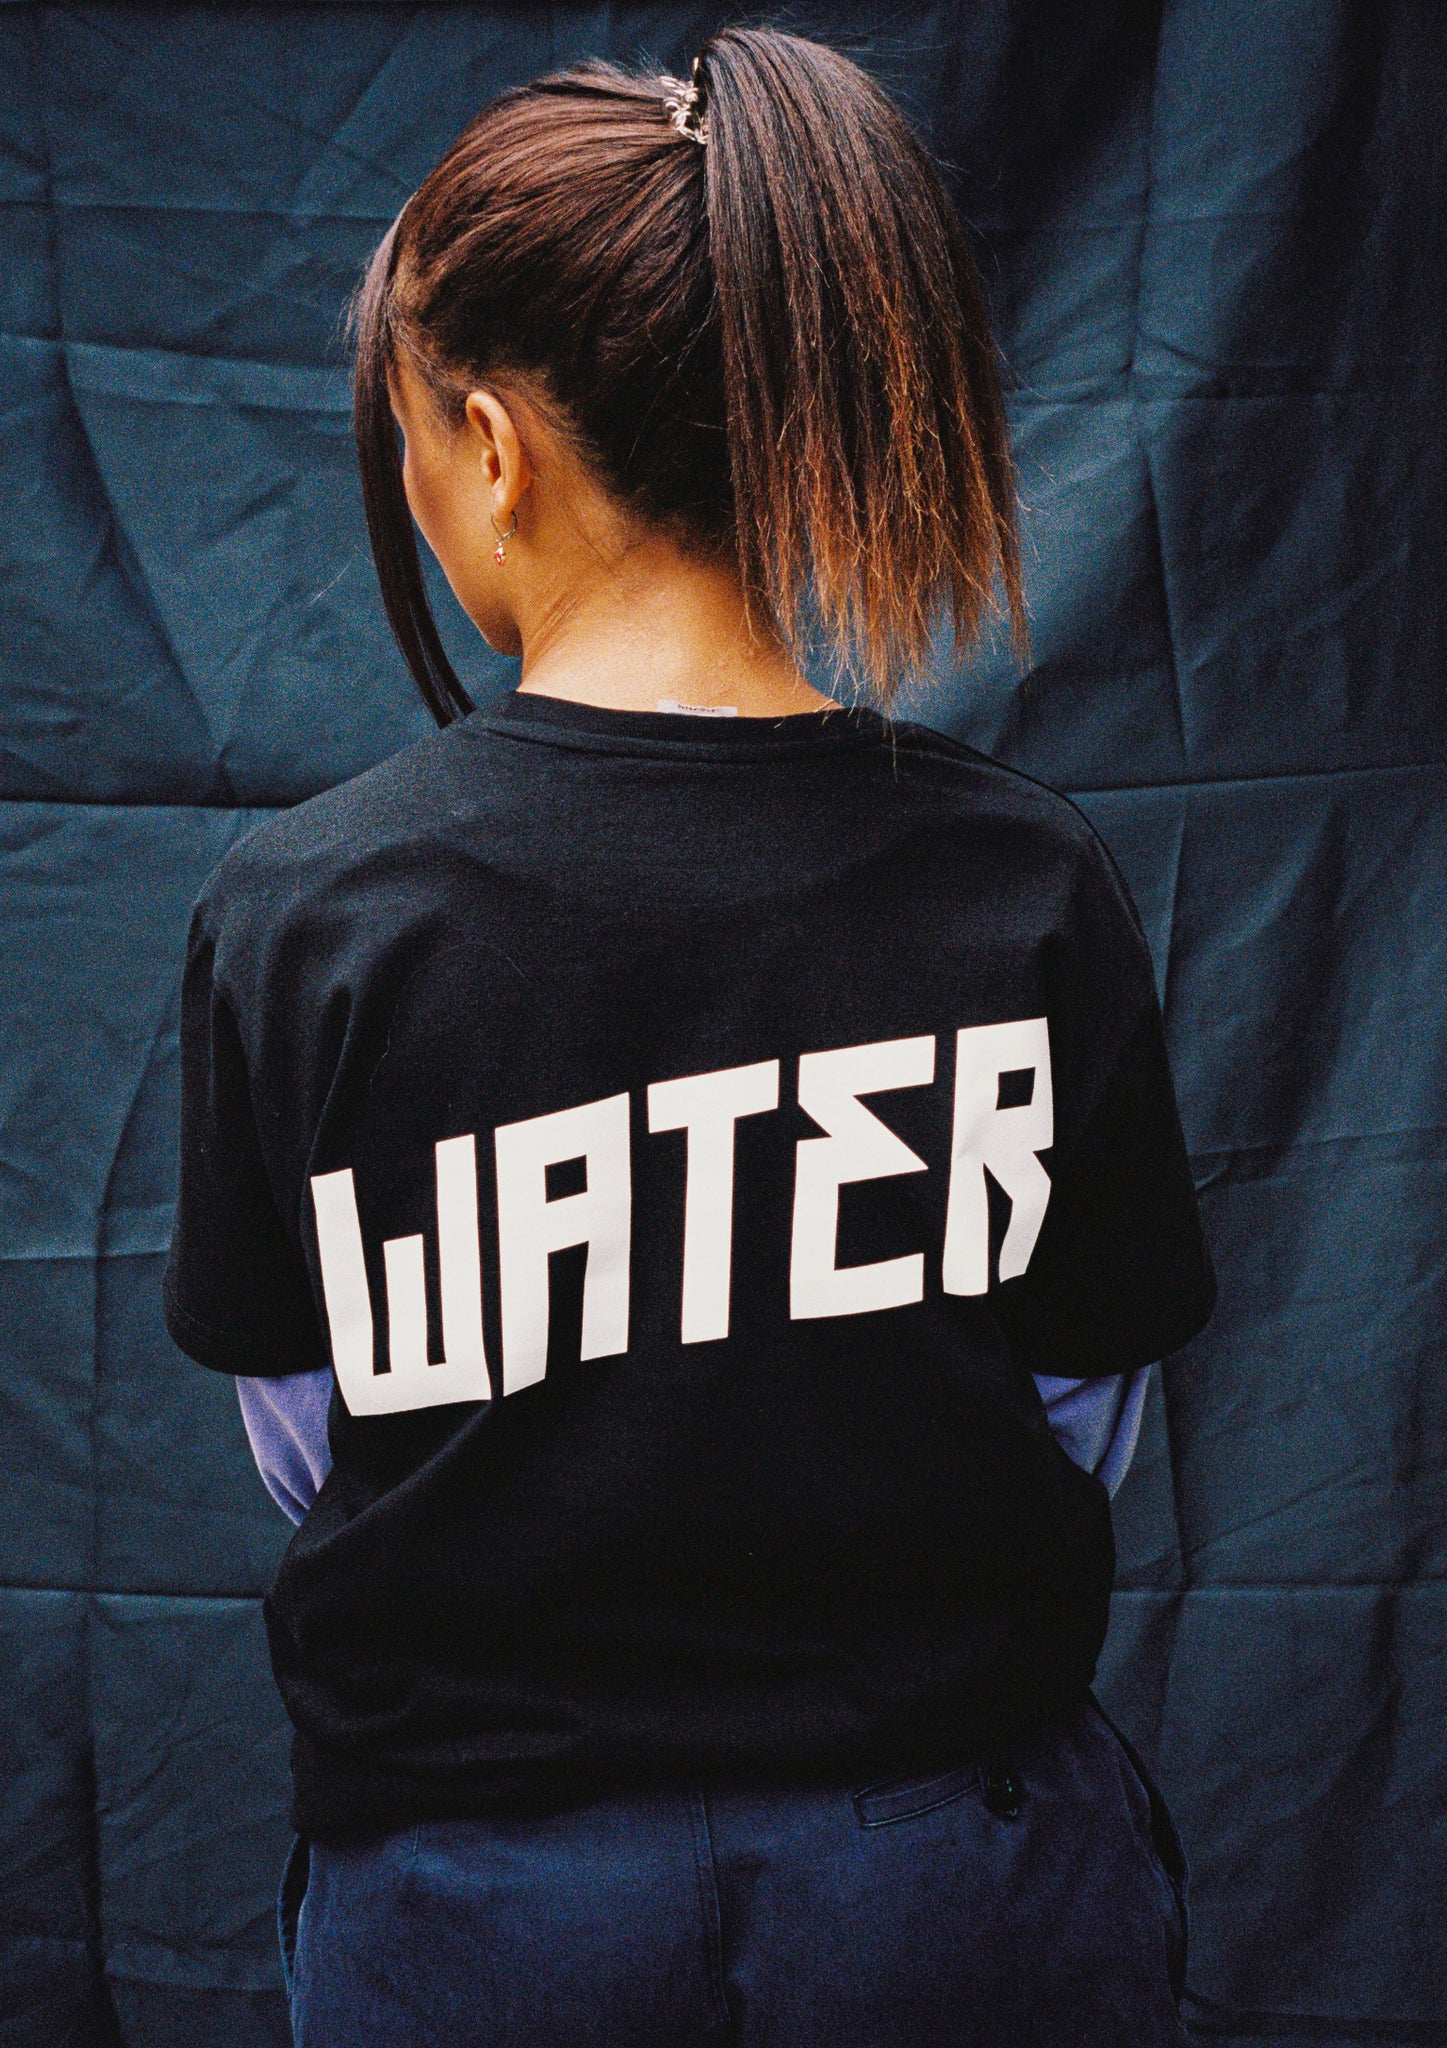 ELEMENT COLLECTION | WATER T-shirt